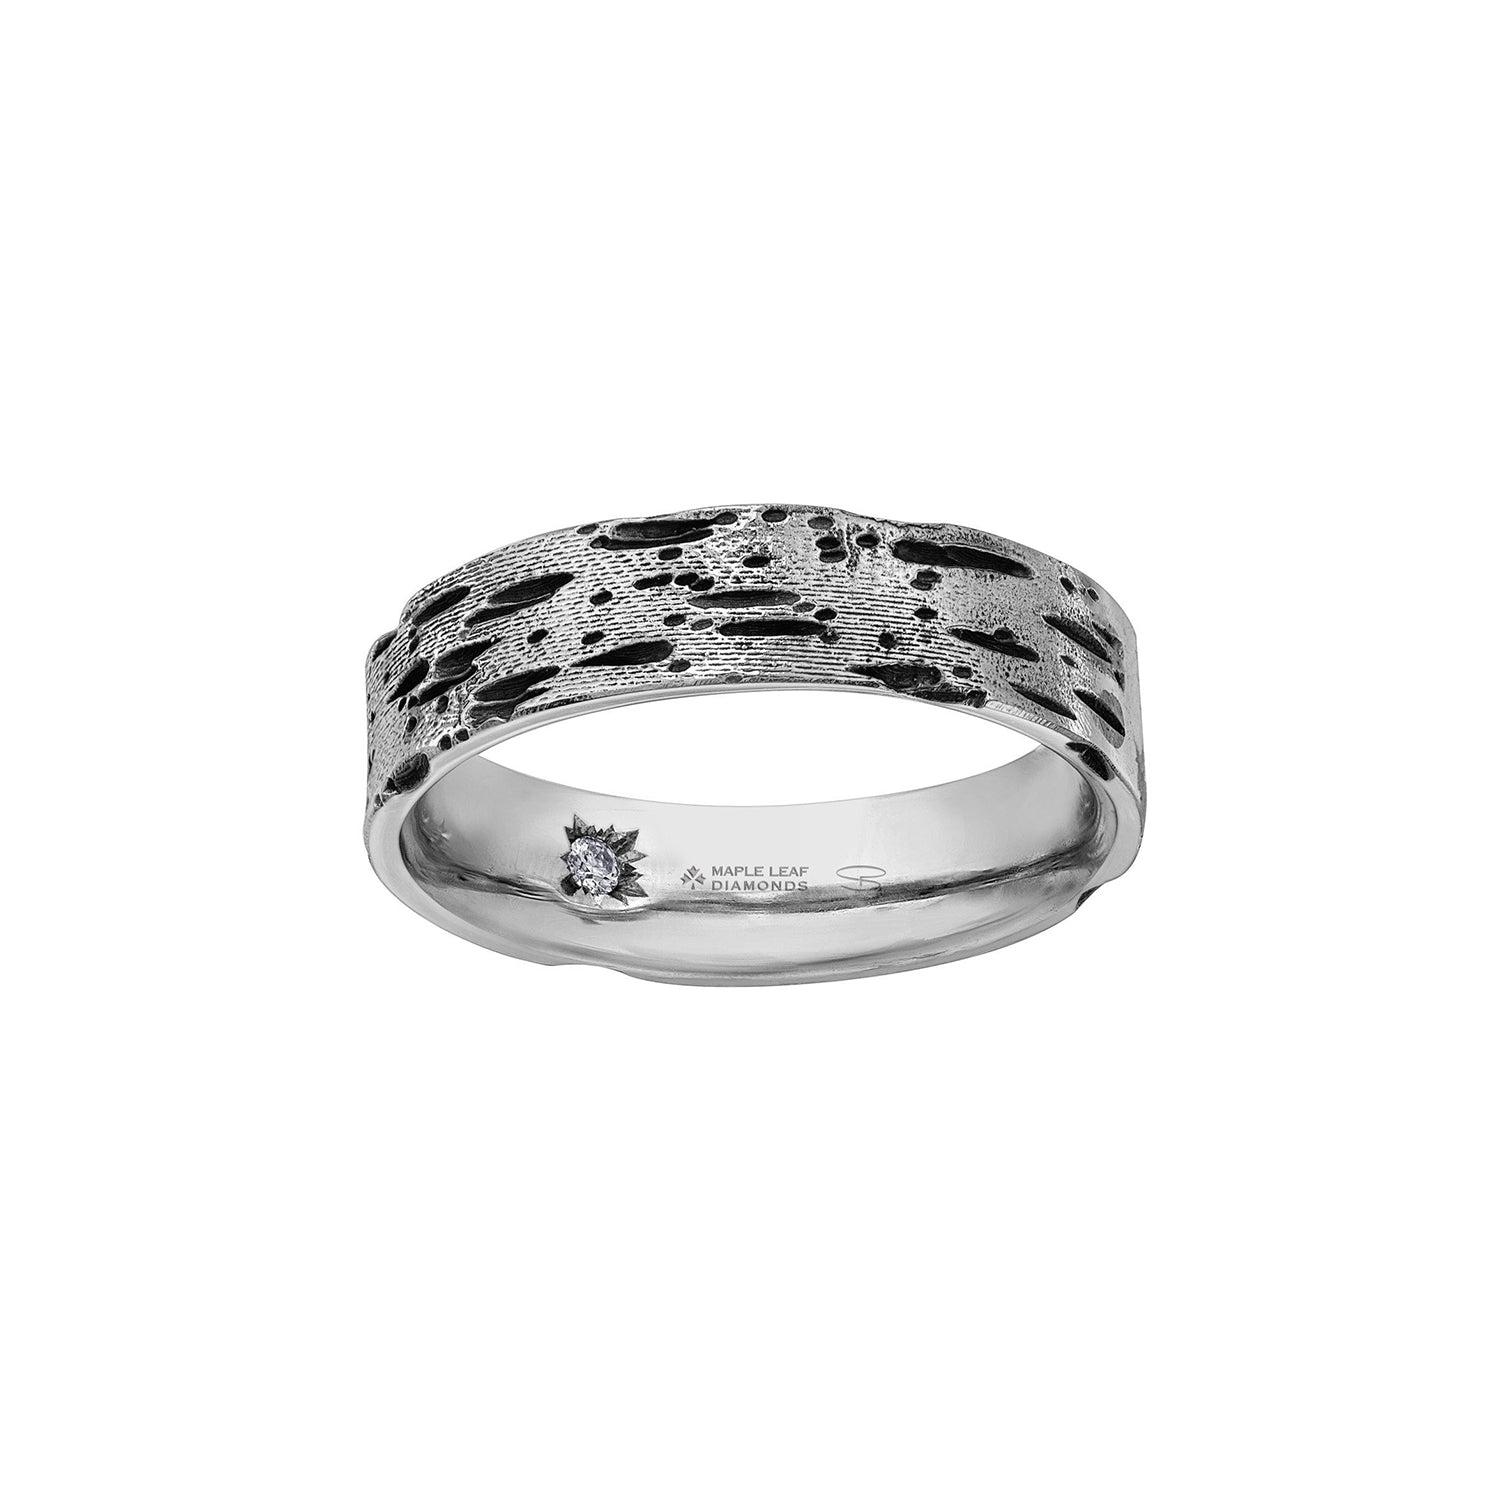 Crafted in 14KT white Certified Canadian Gold, this men’s ring features a birch bark-inspired pattern set with a round brilliant-cut Canadian diamond hidden on the inside of the band.